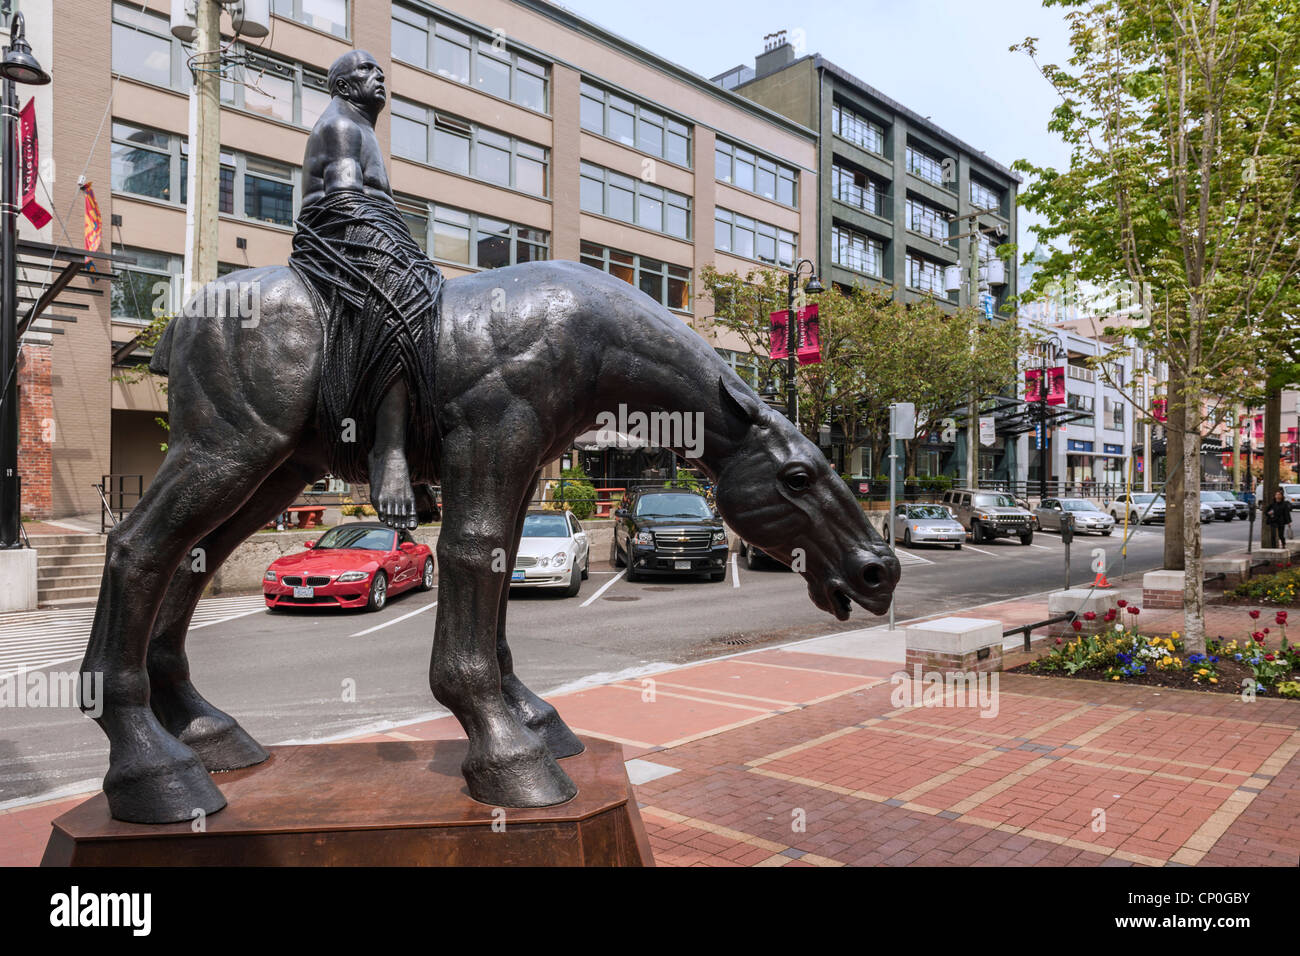 Monumento equestre, Yaletown, Vancouver Foto Stock